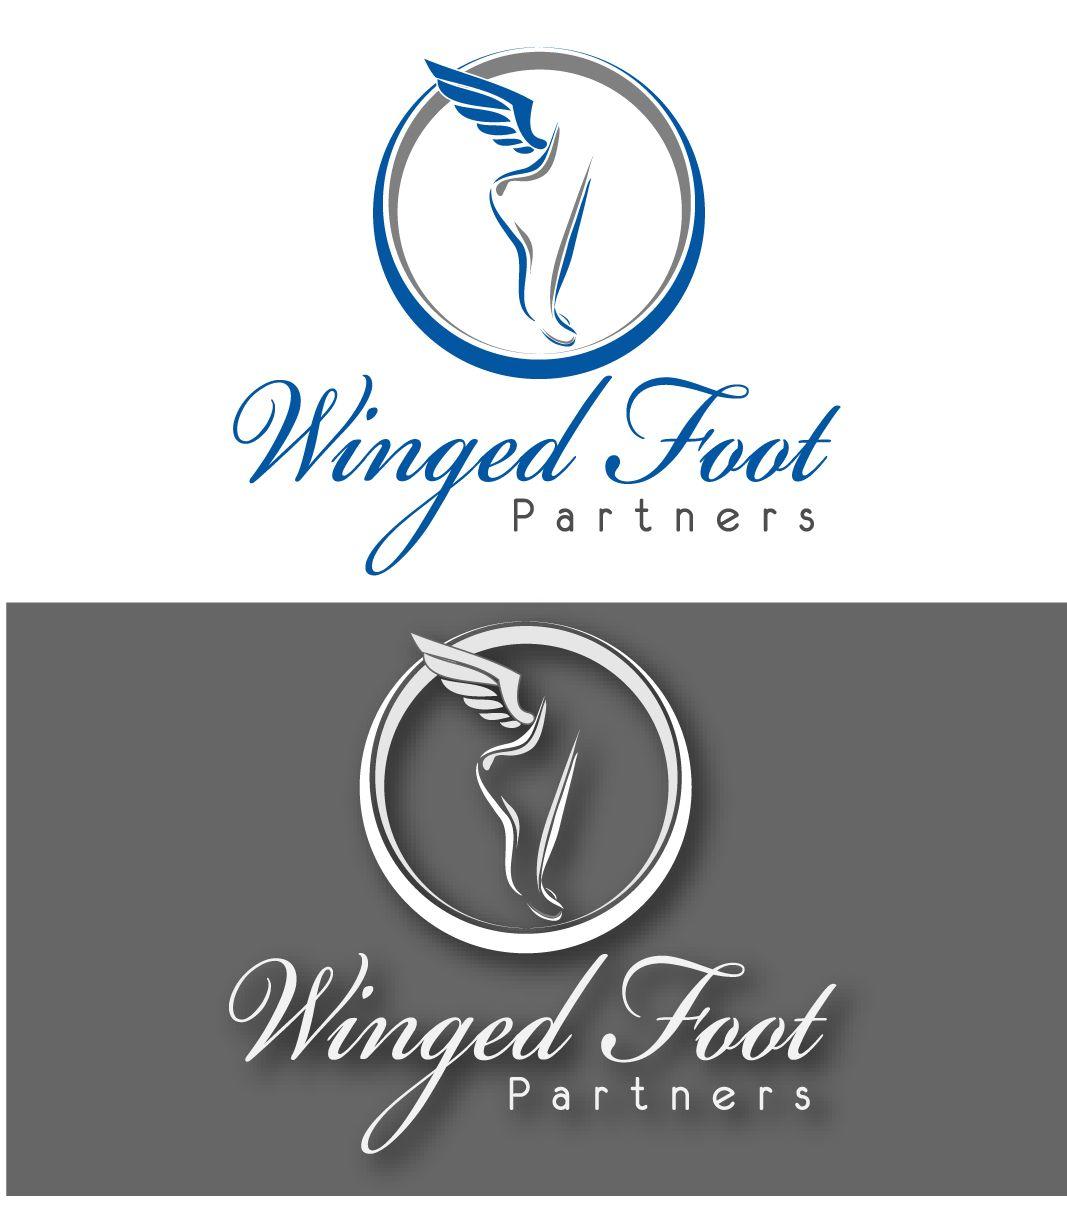 Winged Foot Logo - Professional, Elegant, Business Logo Design for Winged Foot Partners ...